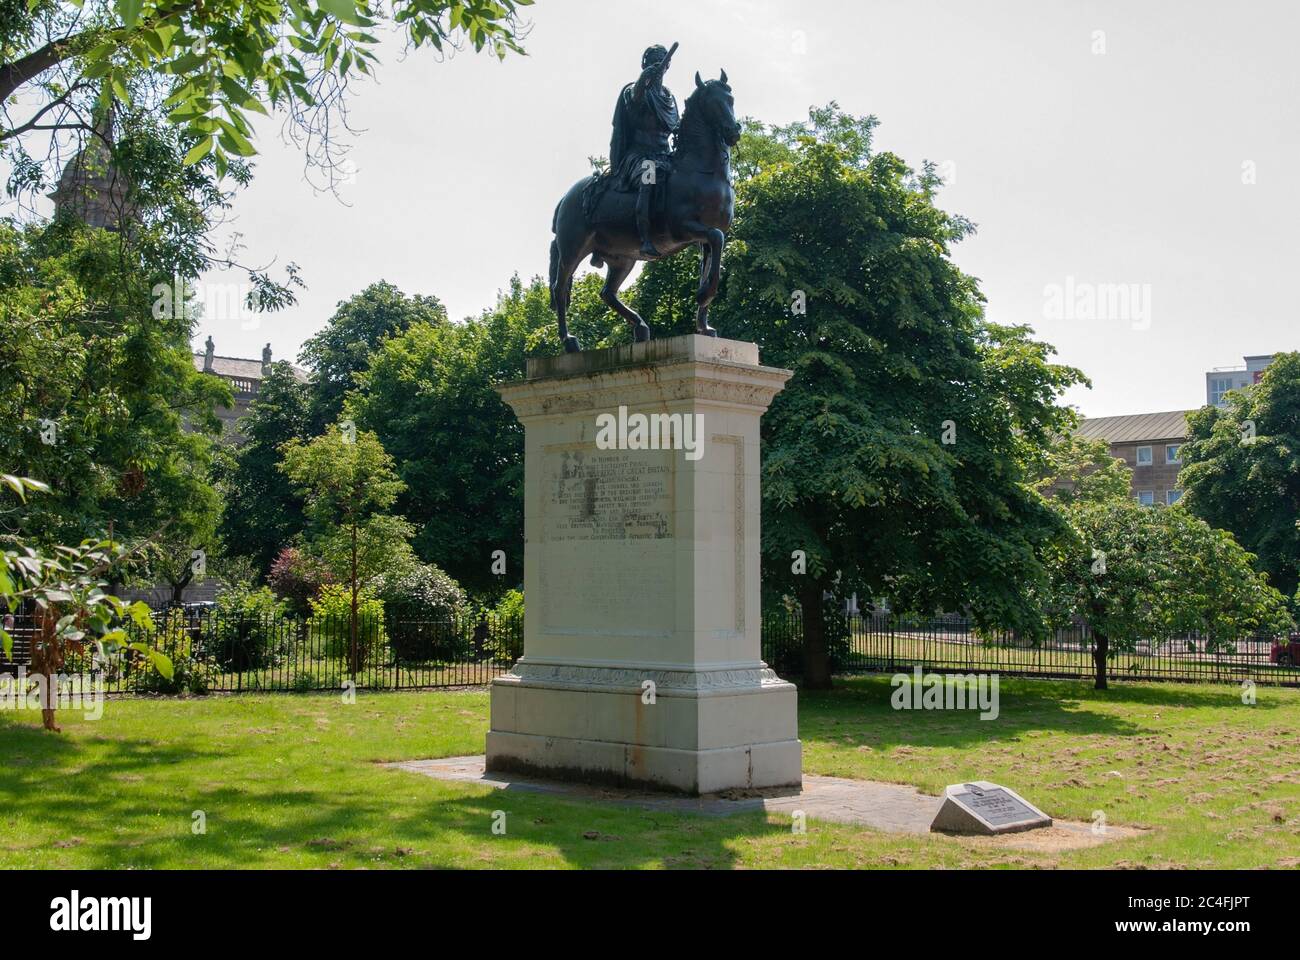 King William Billy of Orange On a Horse Statue Glasgow Scotland United Kingdom landscape view of the front right side of 1735 bronze metal equestrian Stock Photo